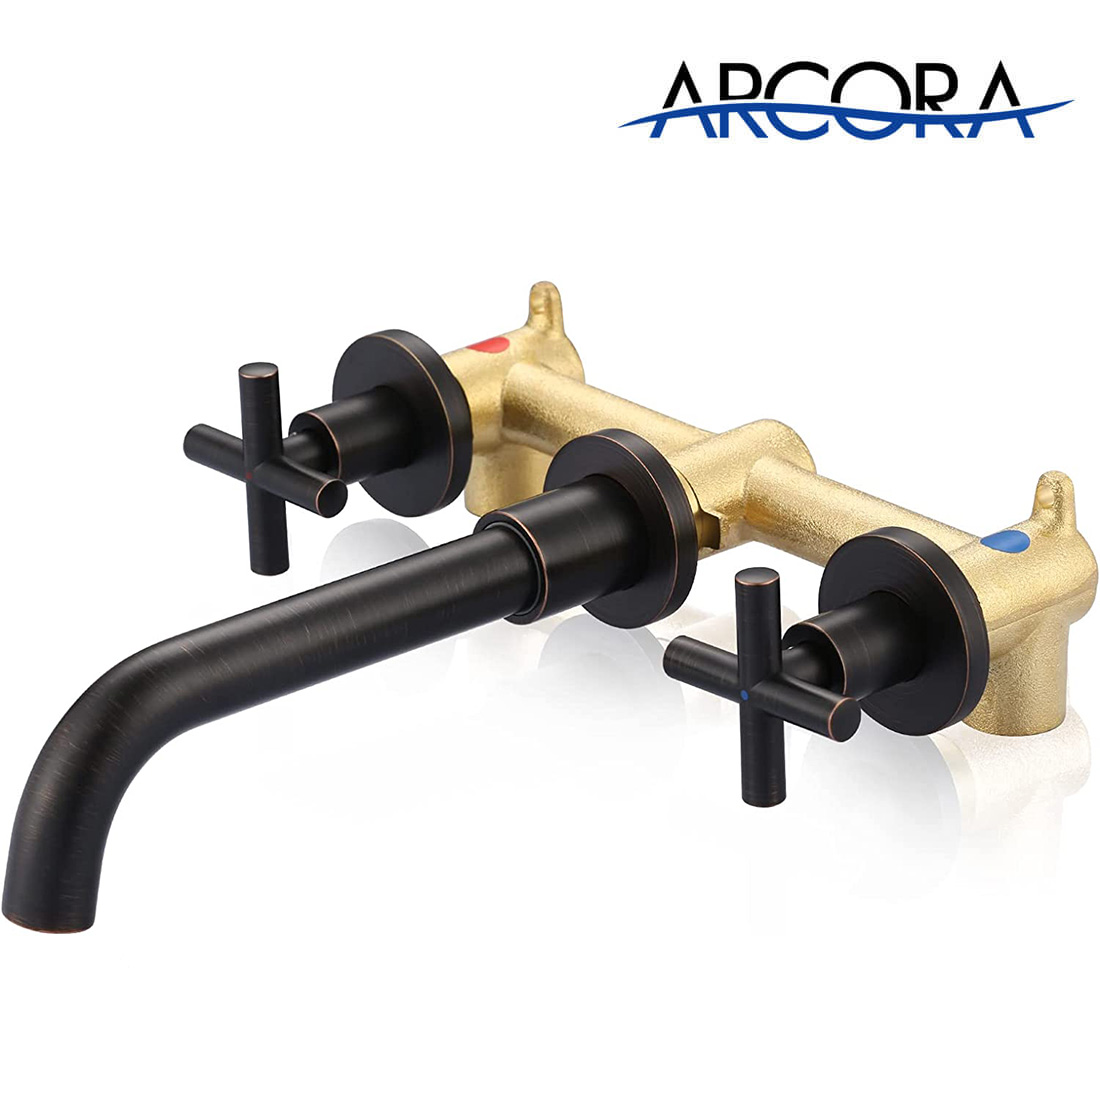 ARCORA Oil Rubbed Bronze 2 Cross Handle Wall Mounted Bathroom Sink Faucet Rough in Valve Included